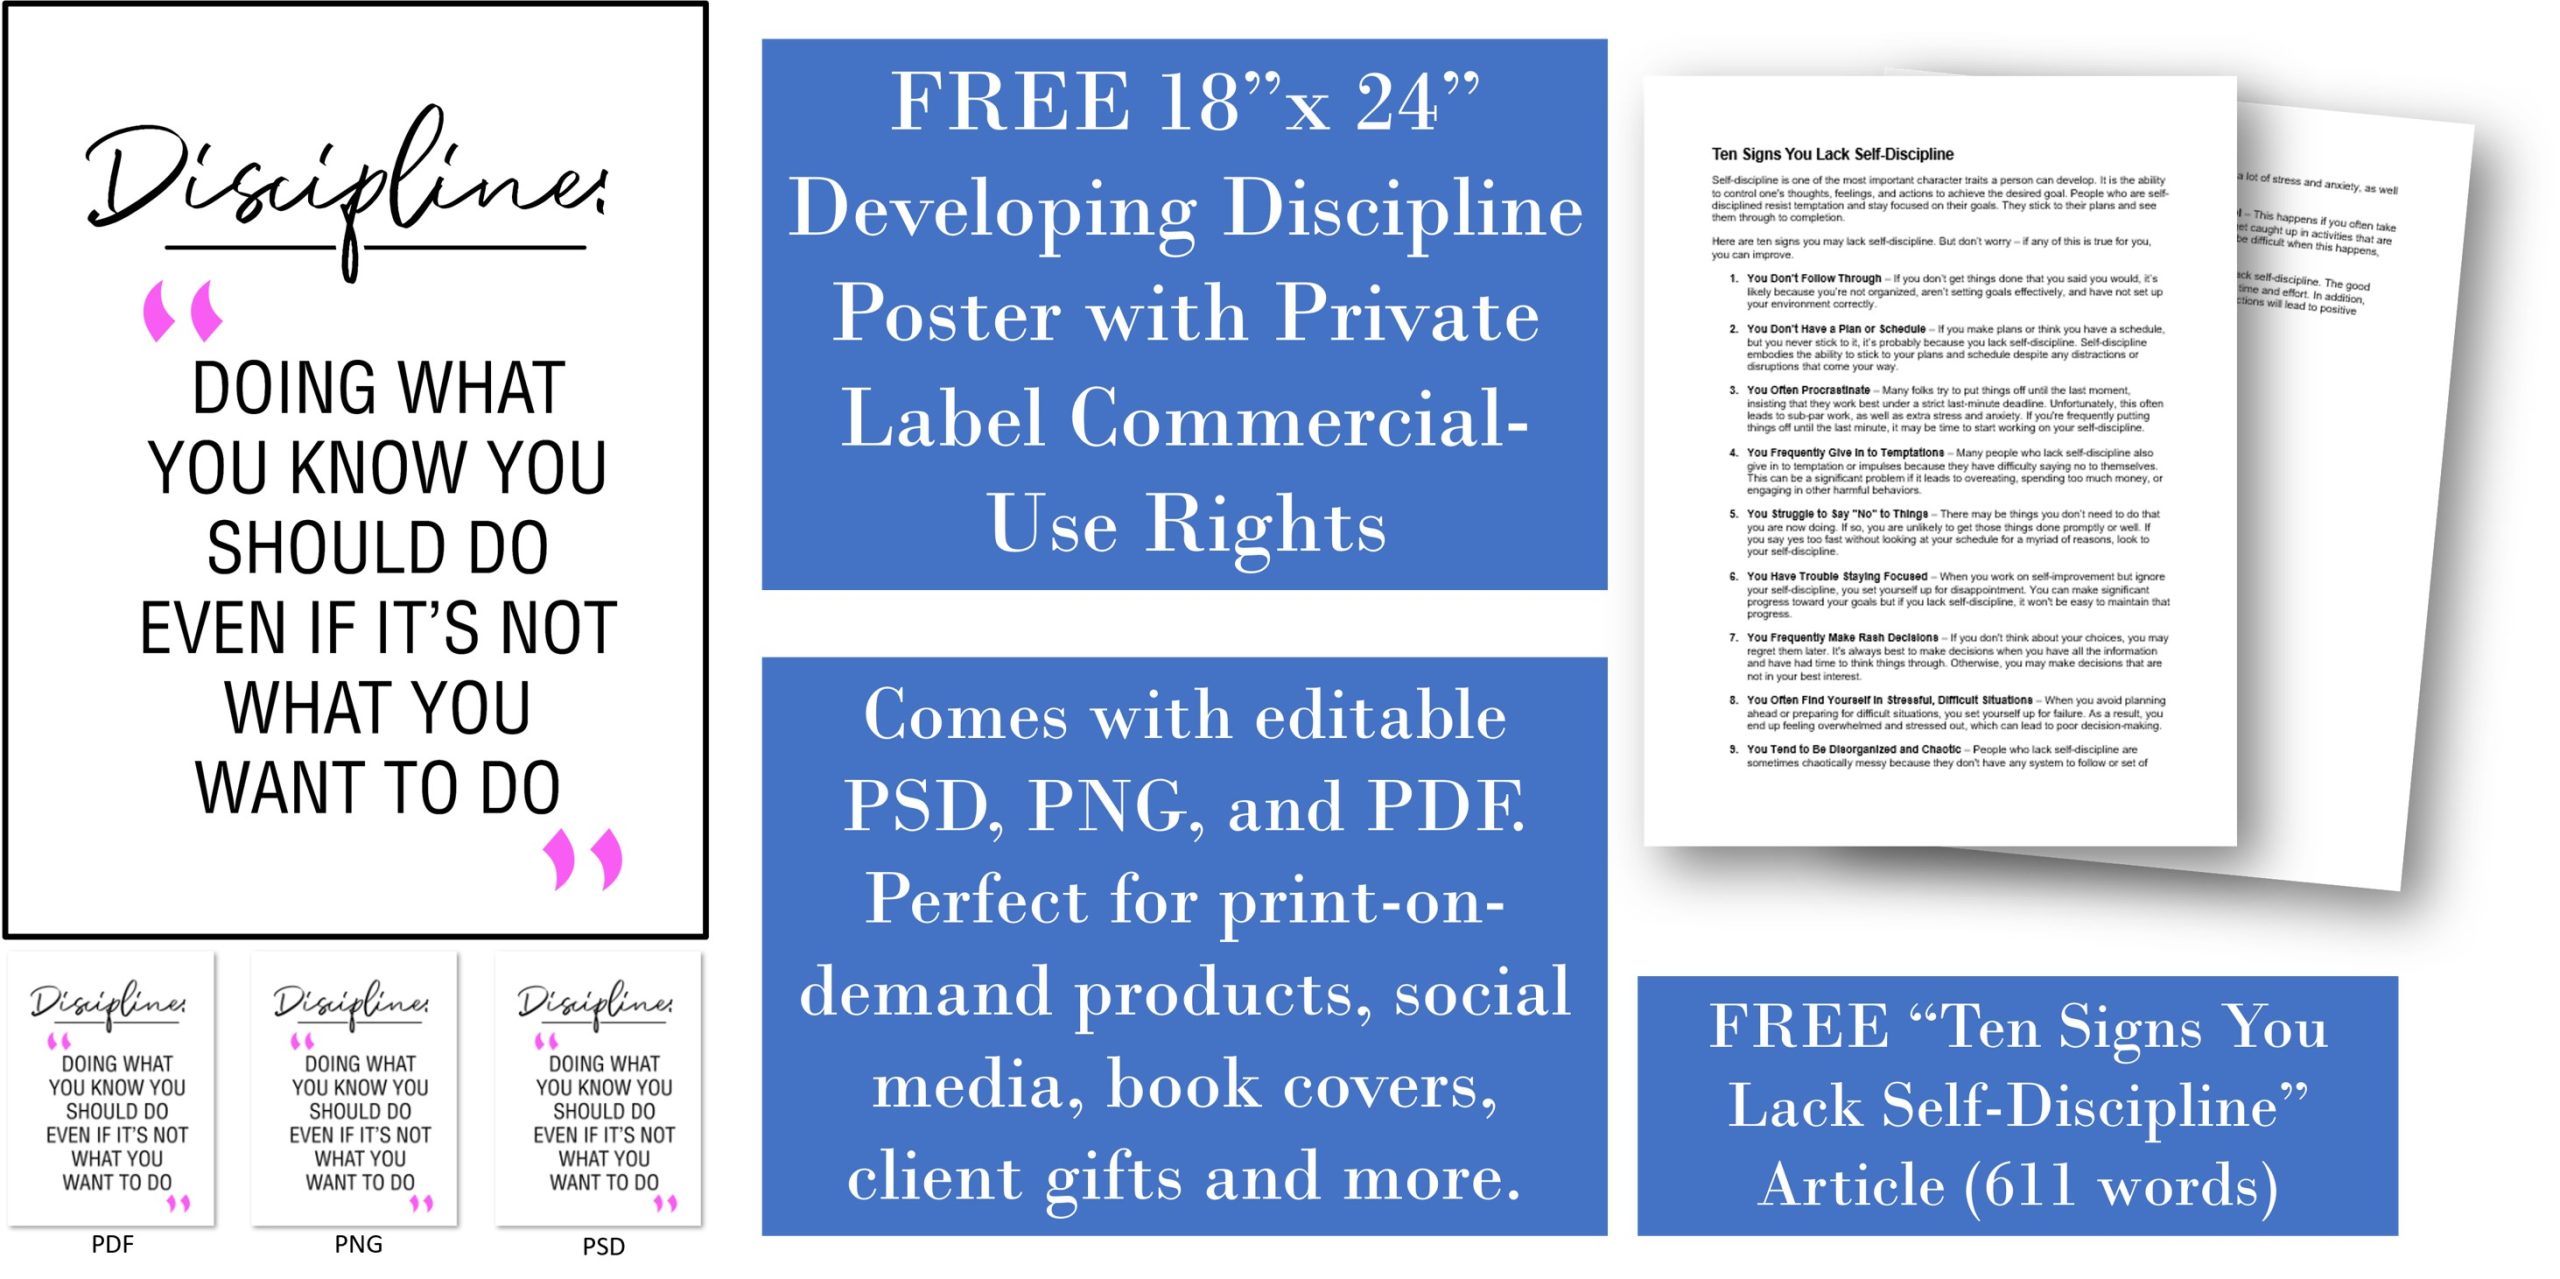 Developing Discipline Free Poster and Articles